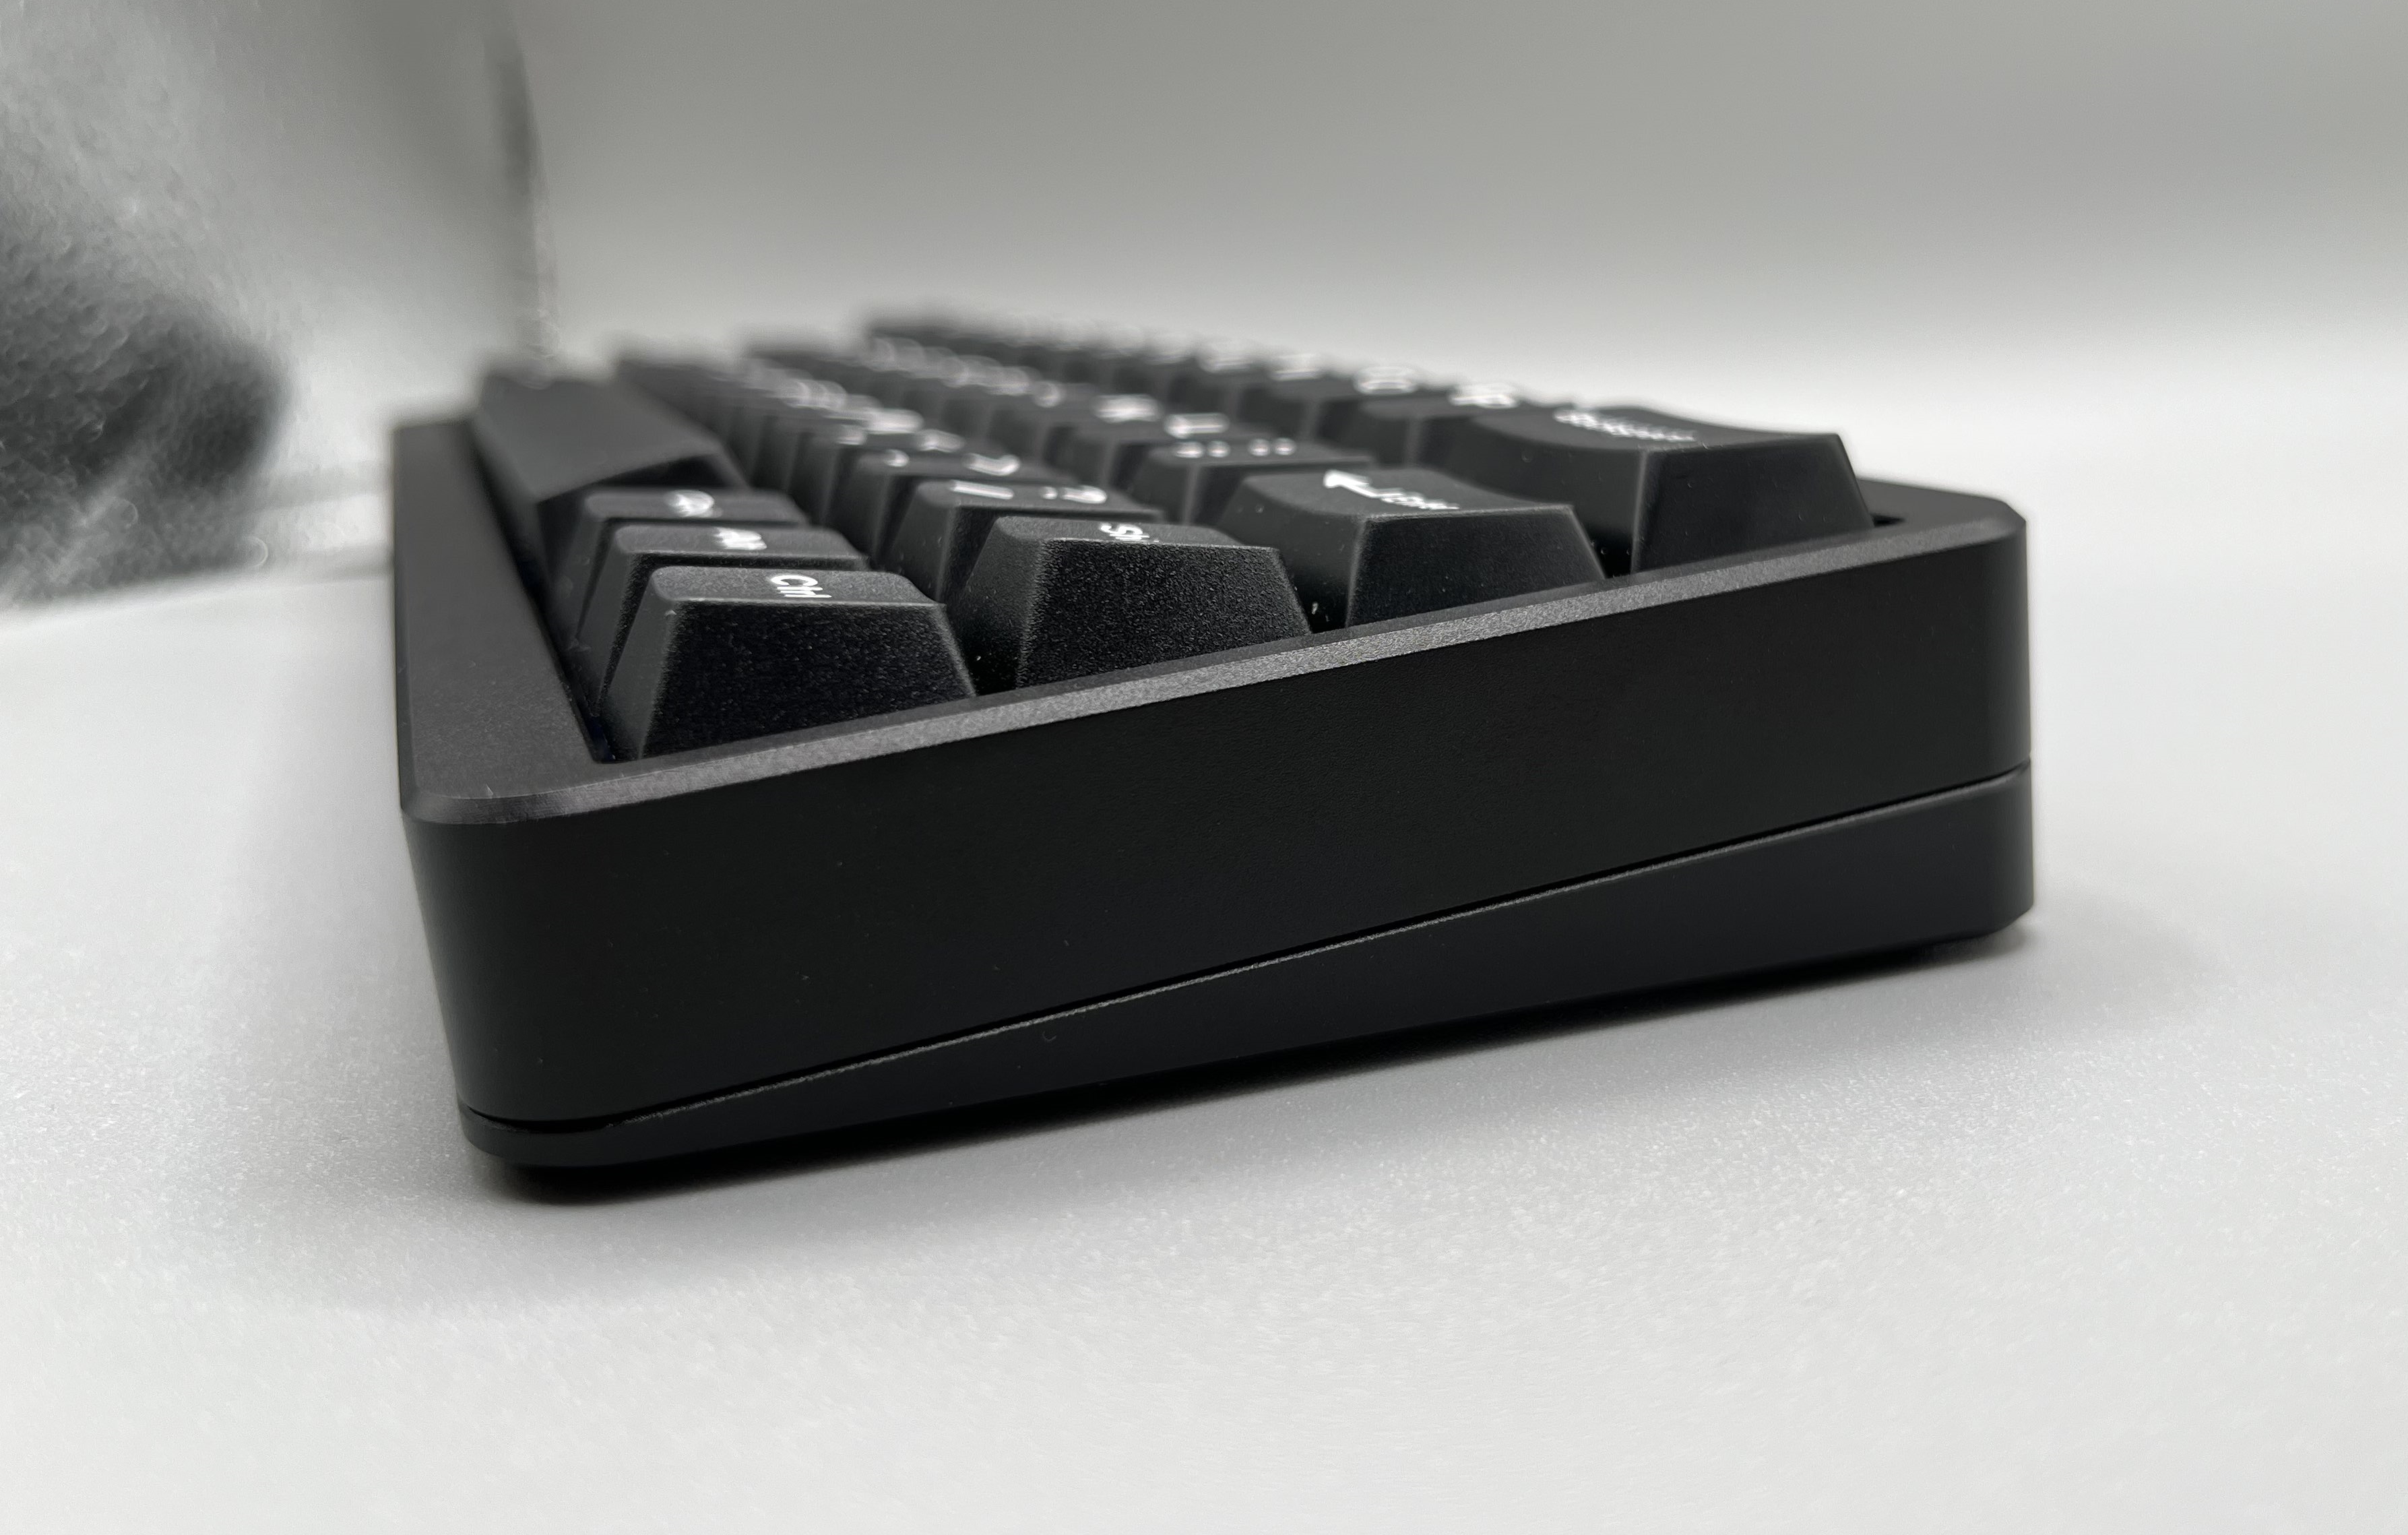 Side profile of Hubris showing the 5-degree typing angle